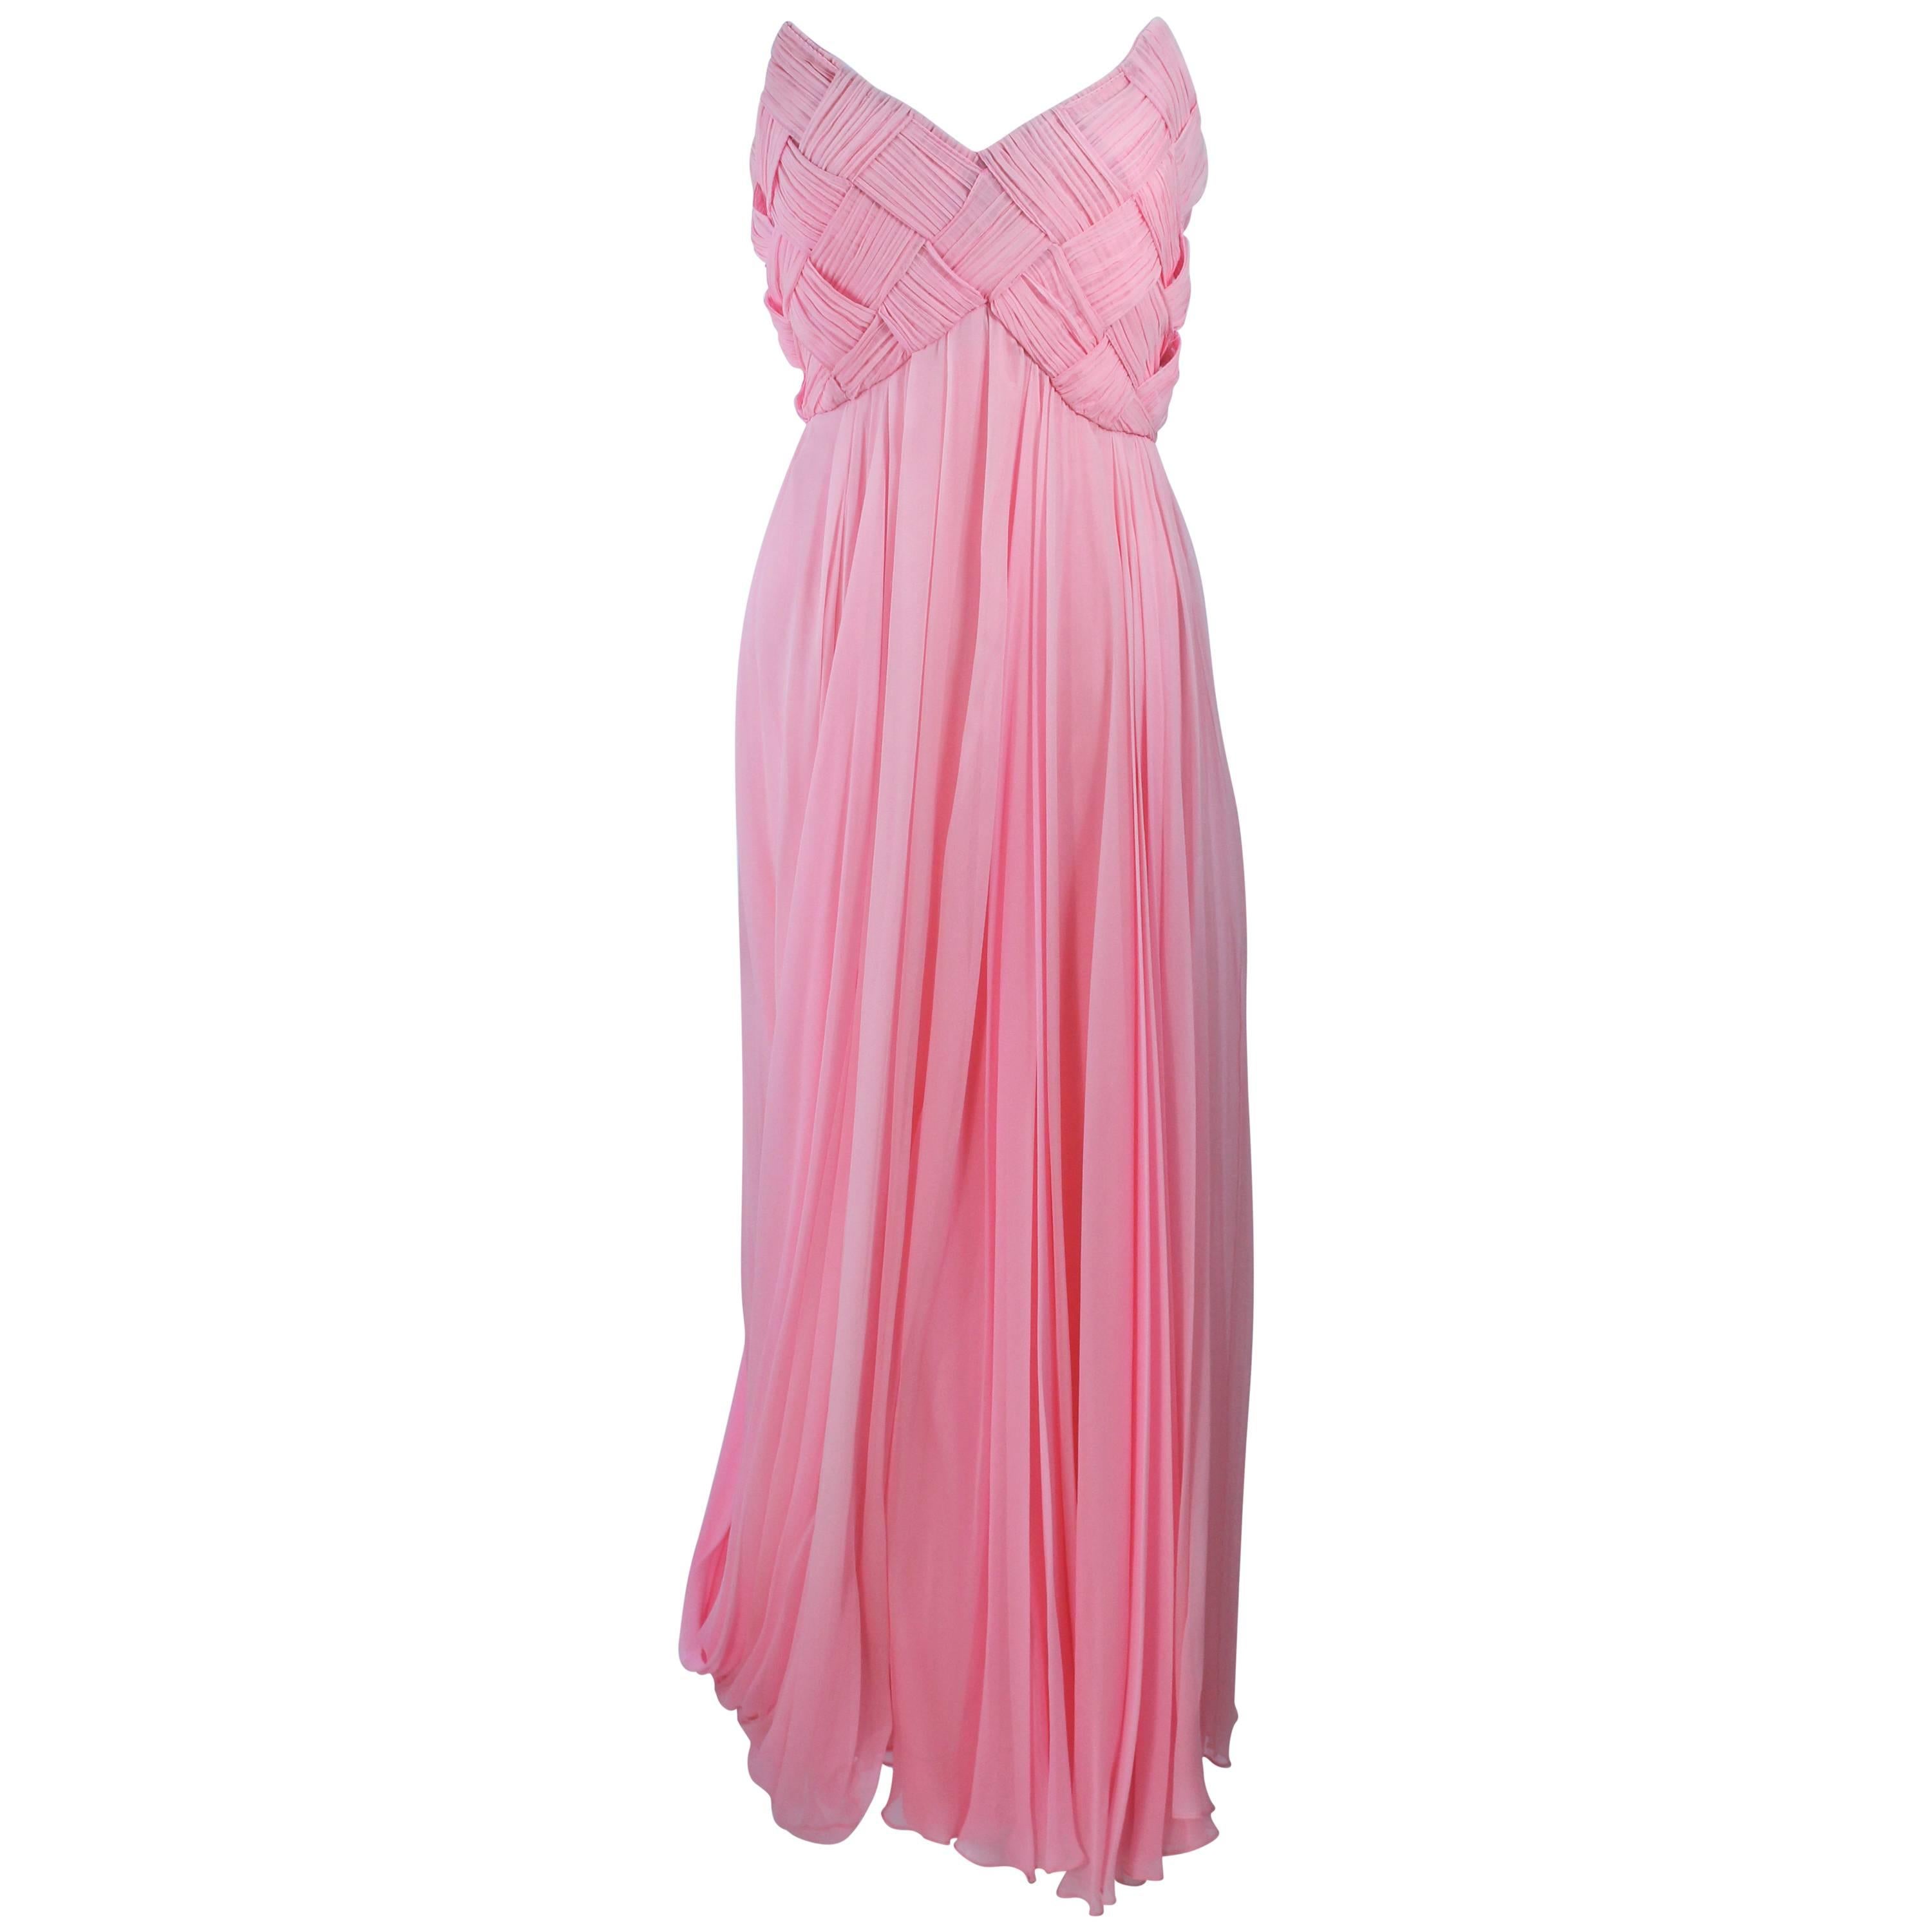 SCAASI Pink Draped Chiffon Gown with Criss-Cross Bodice Size 4 6